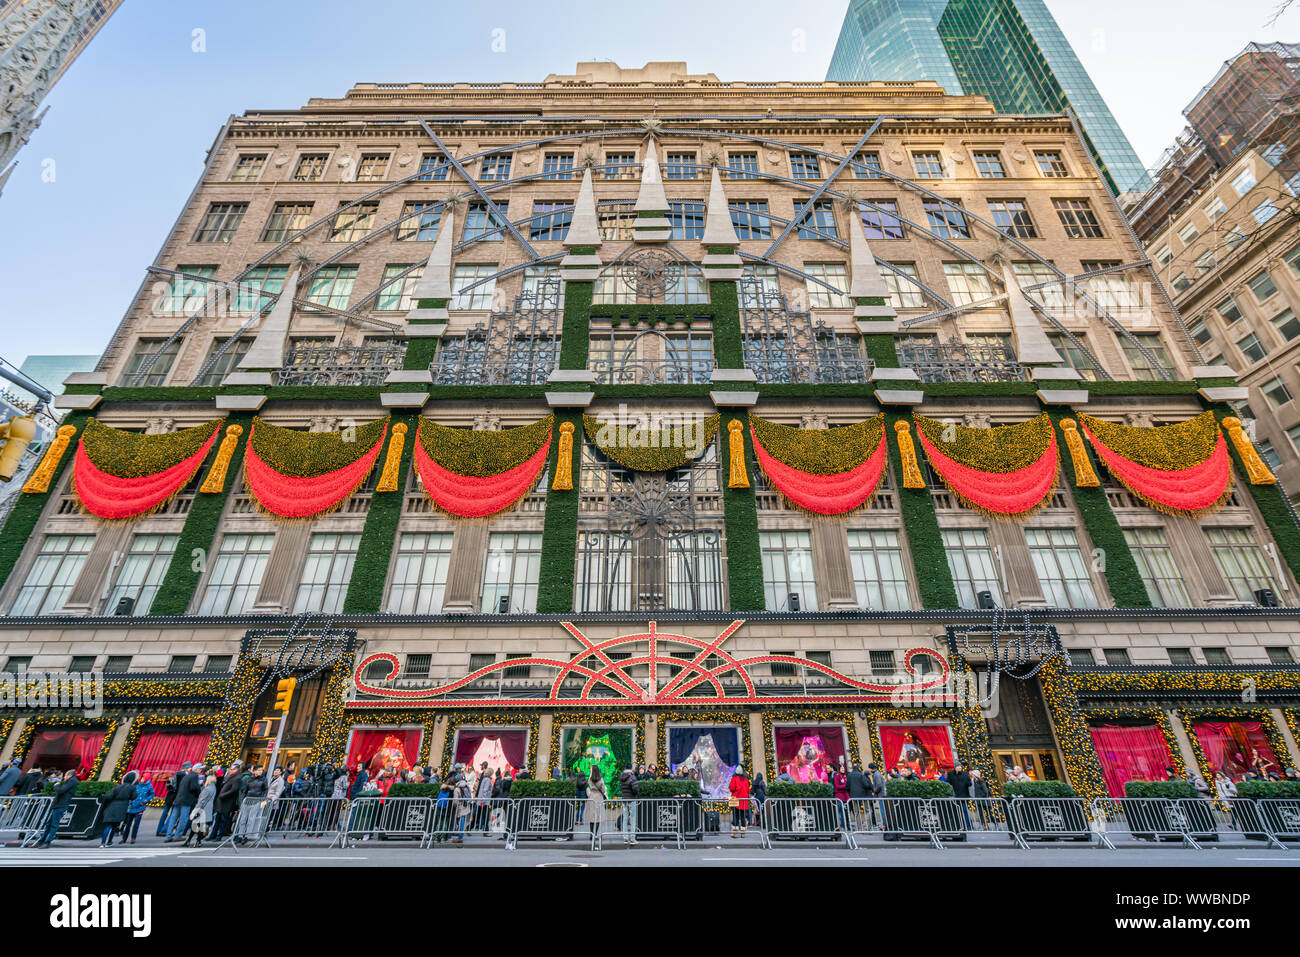 New York City, NY, USA - December, 2018 - Saks Fifth Avenue, luxury department stores, decorated for Christmas Holidays, Manhattan. Stock Photo